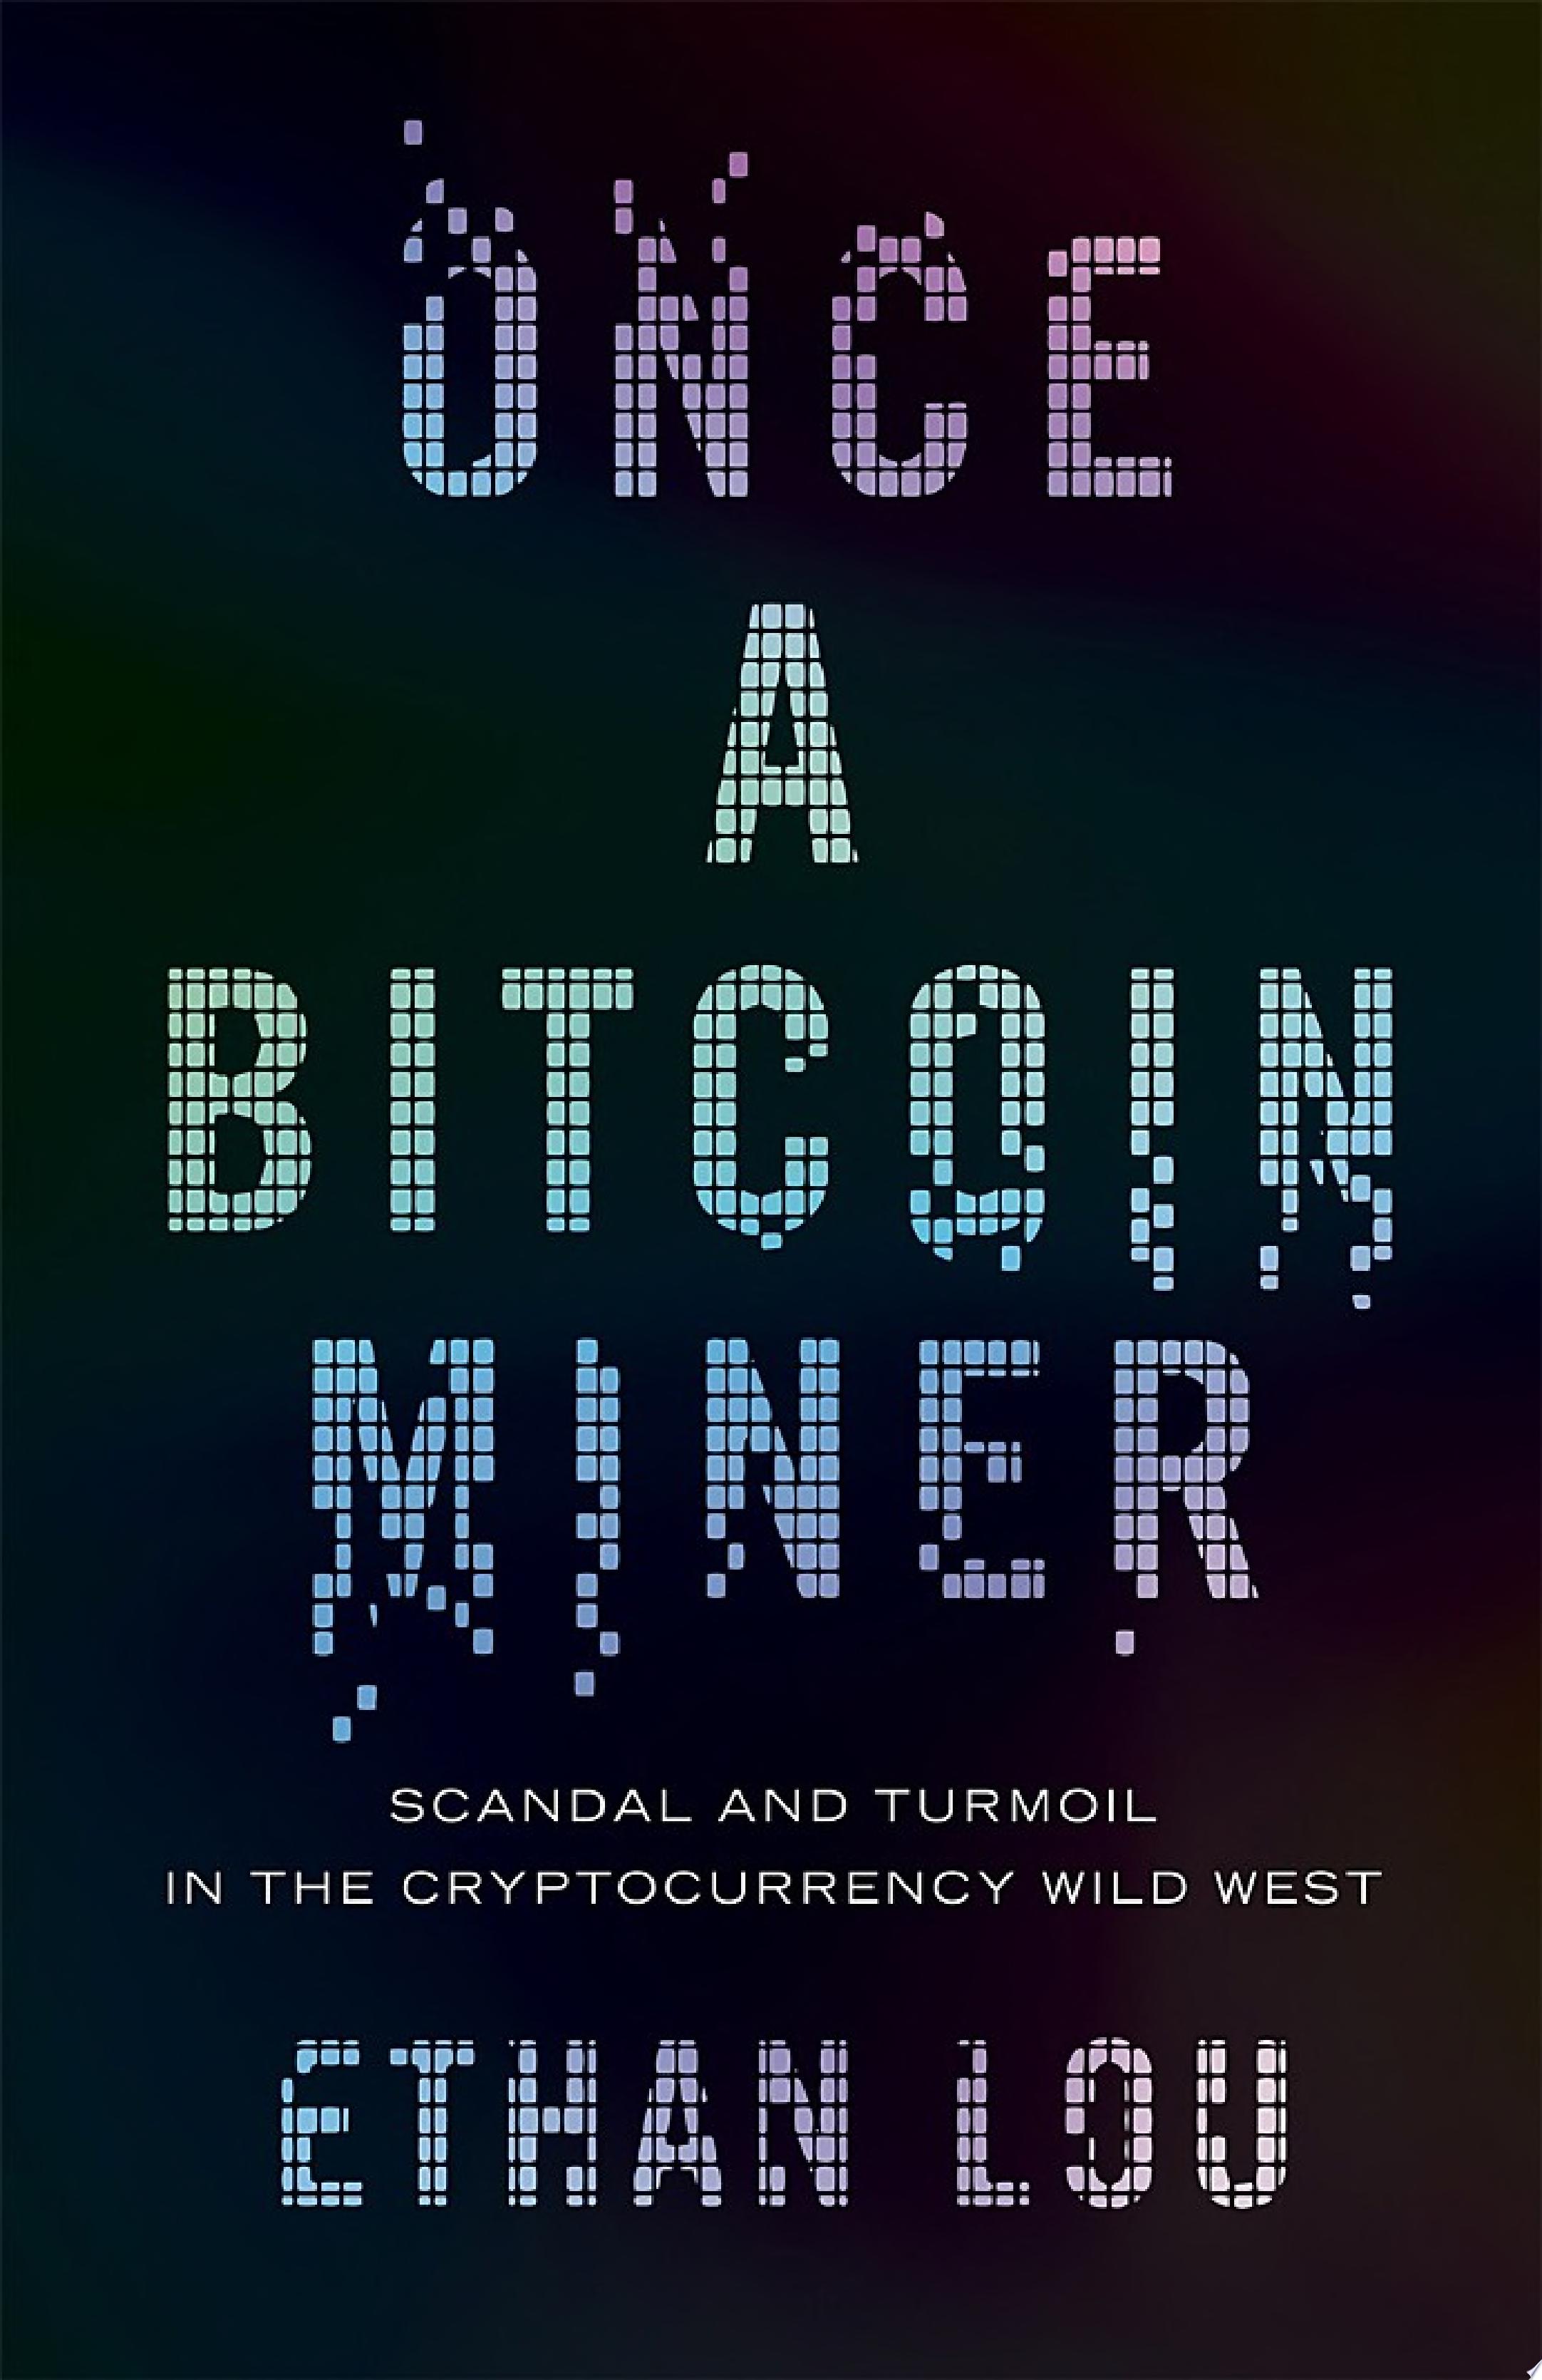 Image for "Once a Bitcoin Miner"